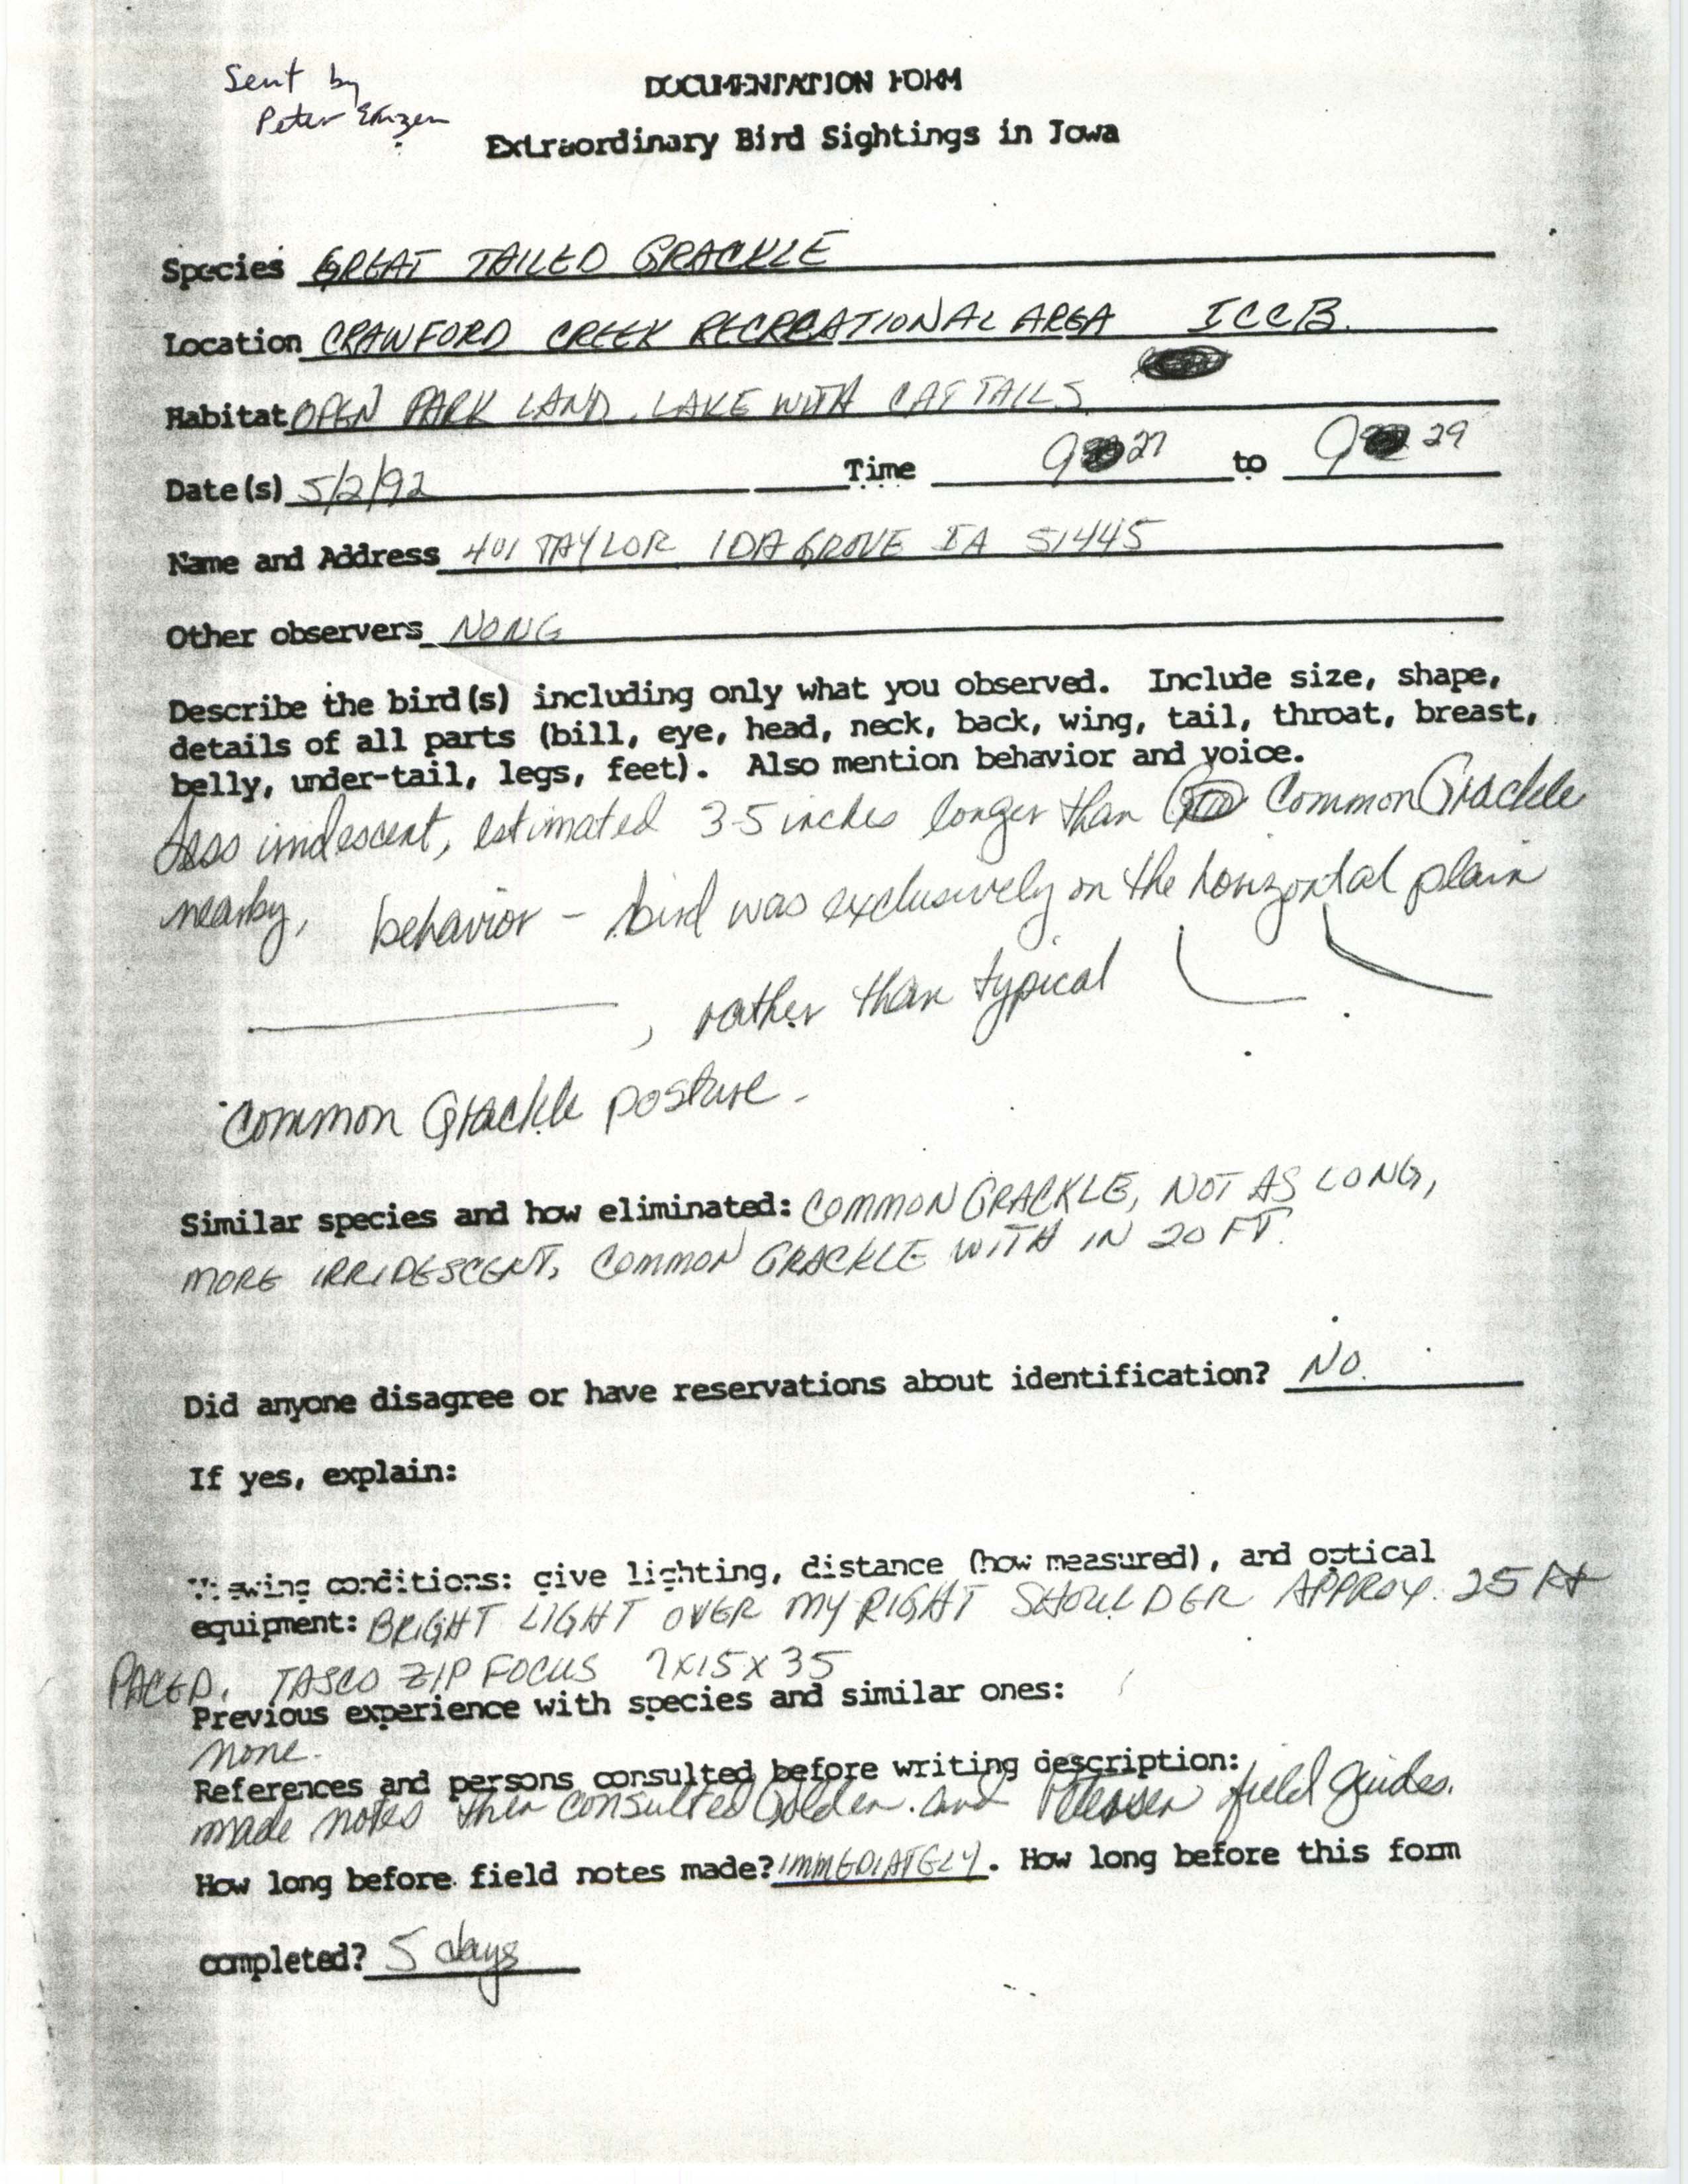 Rare bird documentation form for Great-tailed Grackle at Crawford Creek Recreation Area, 1992